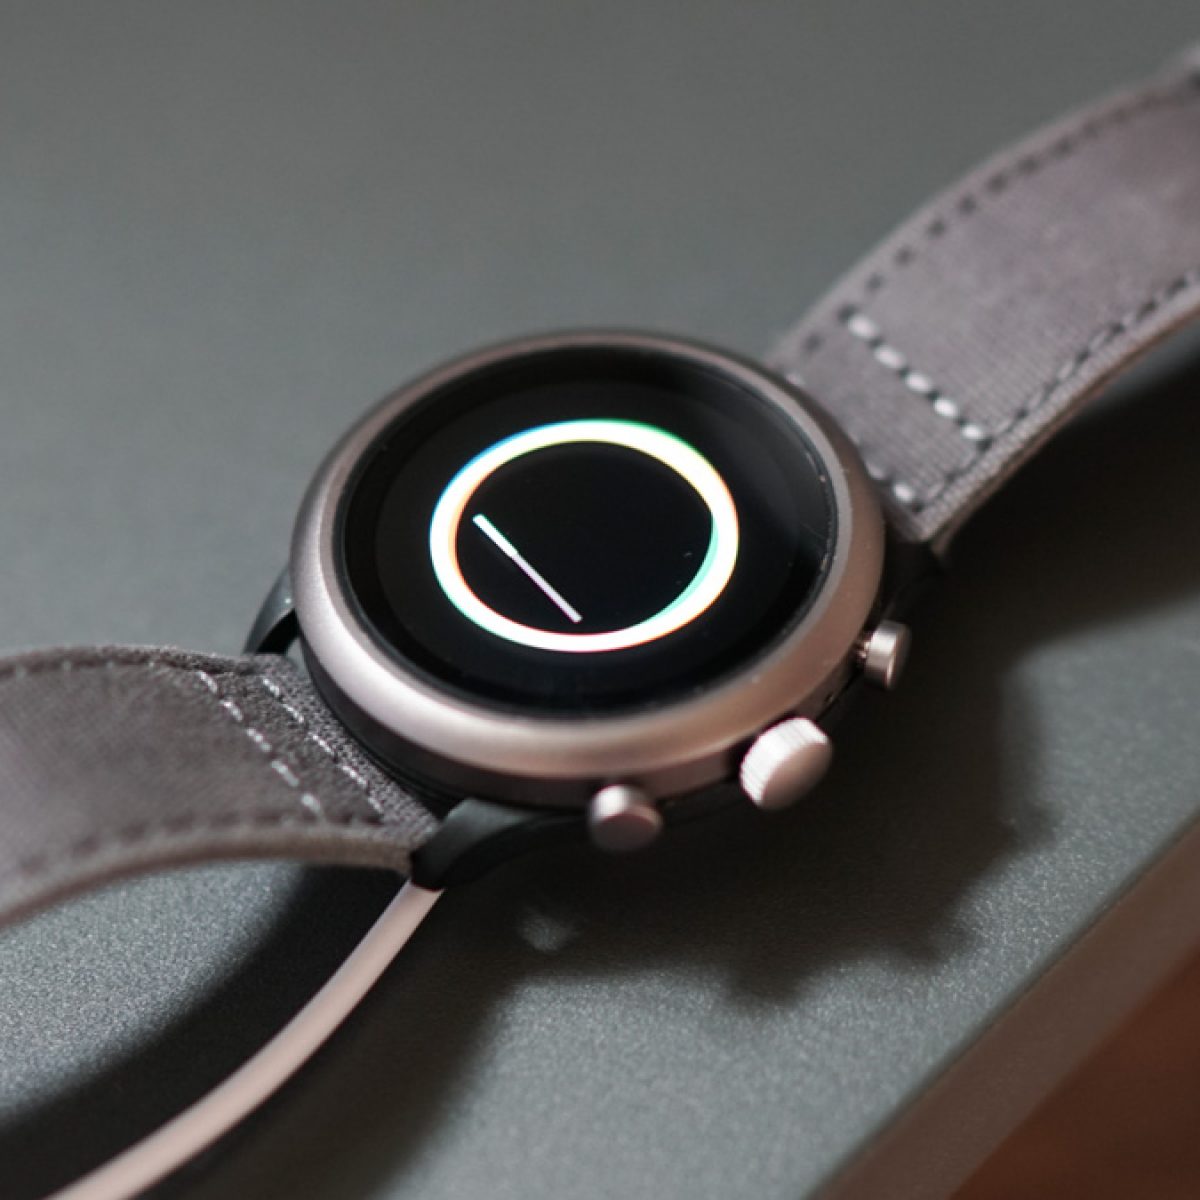 Updates Onto Fossil Wear OS Watches